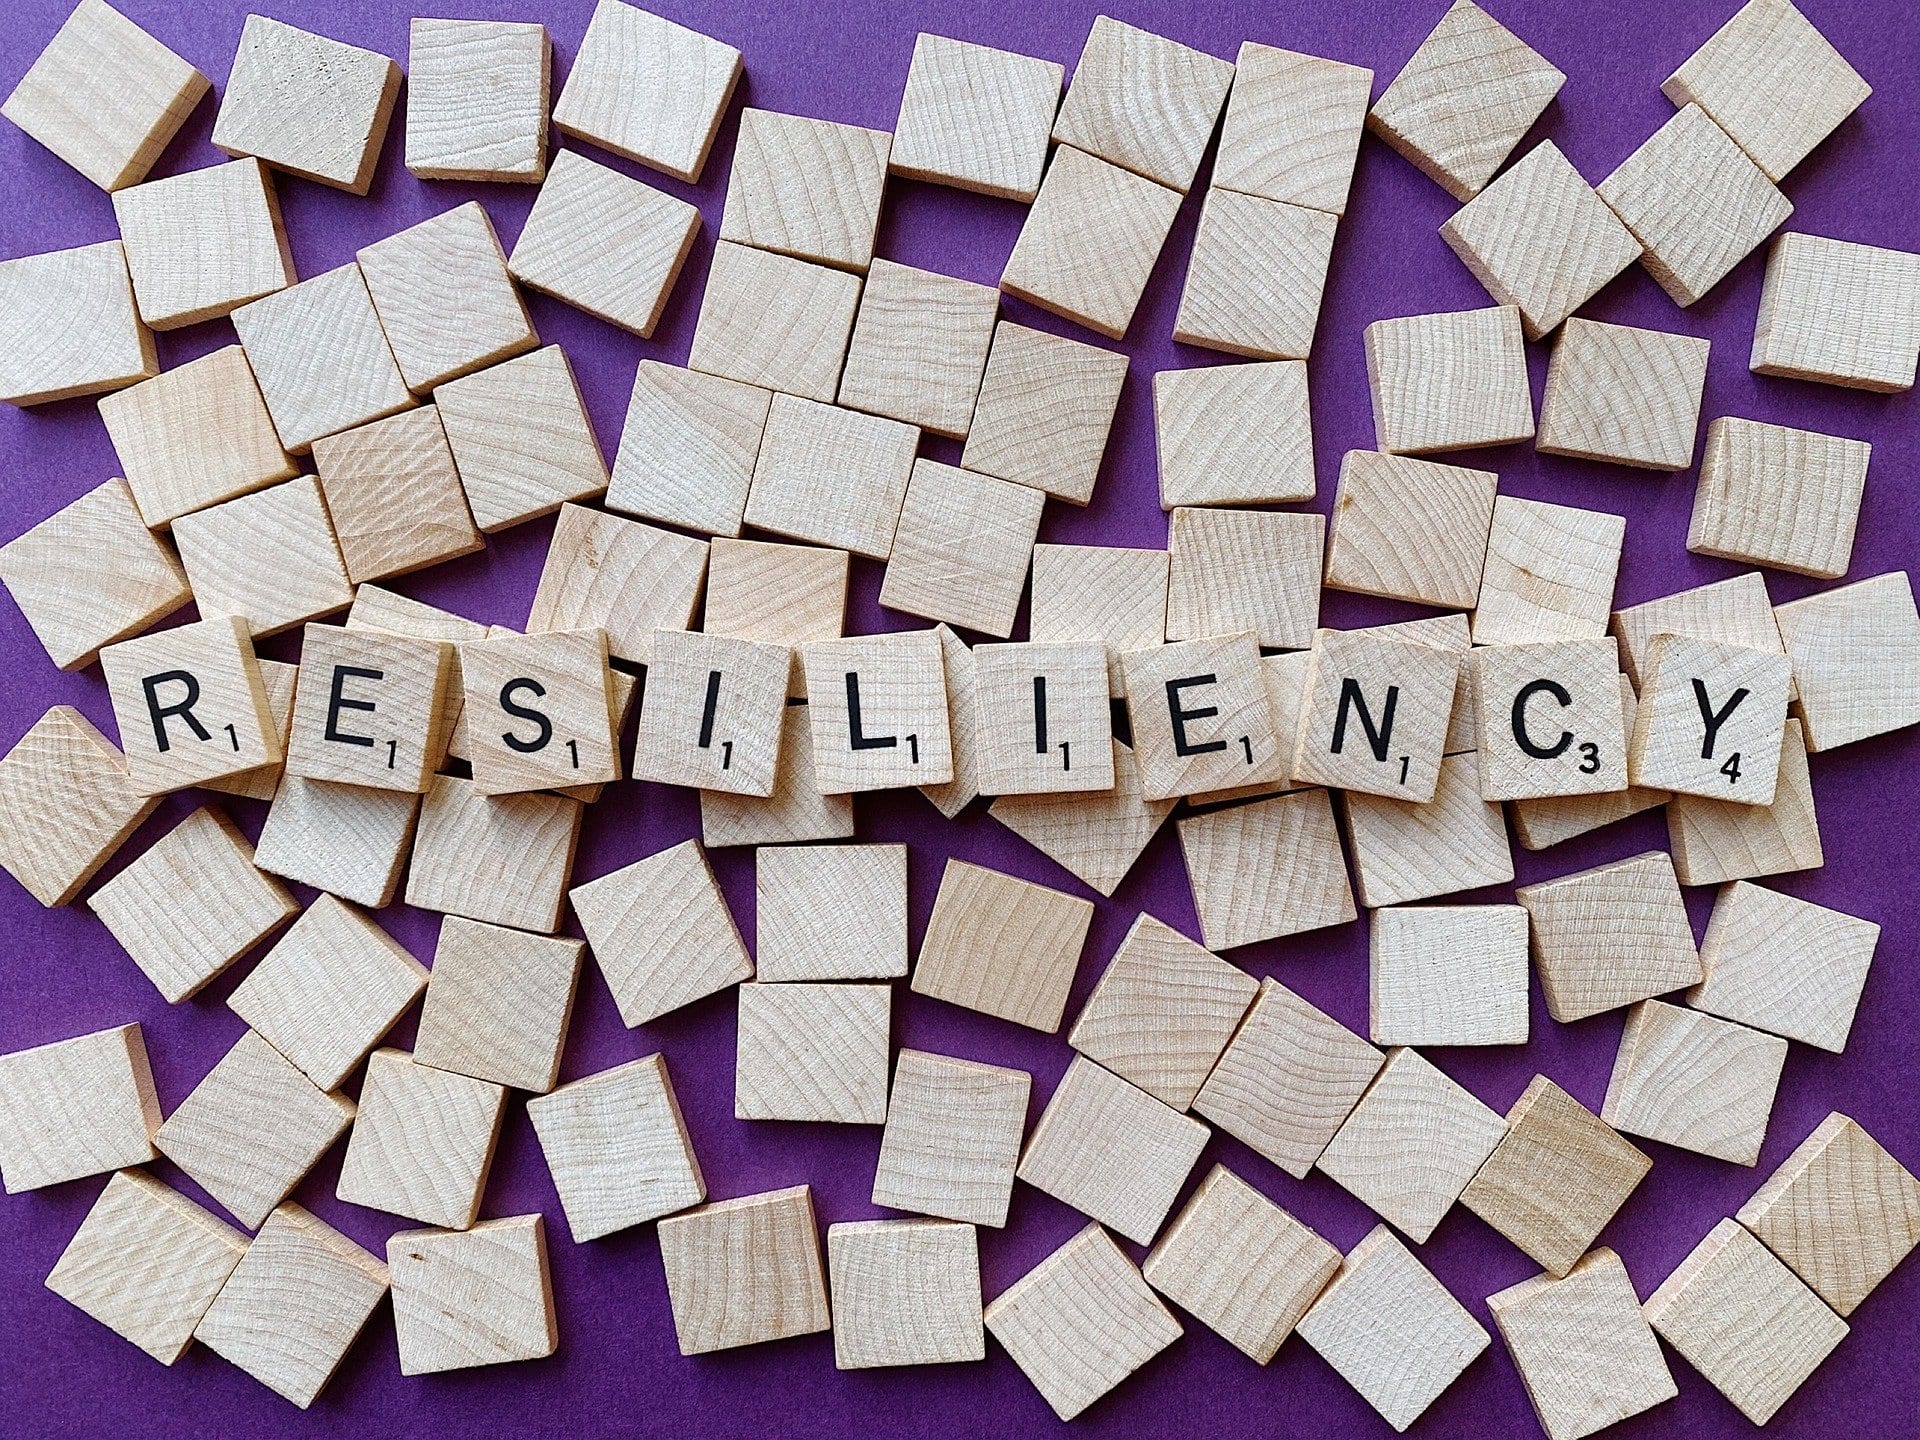 Scrabble tiles spelling out resiliency